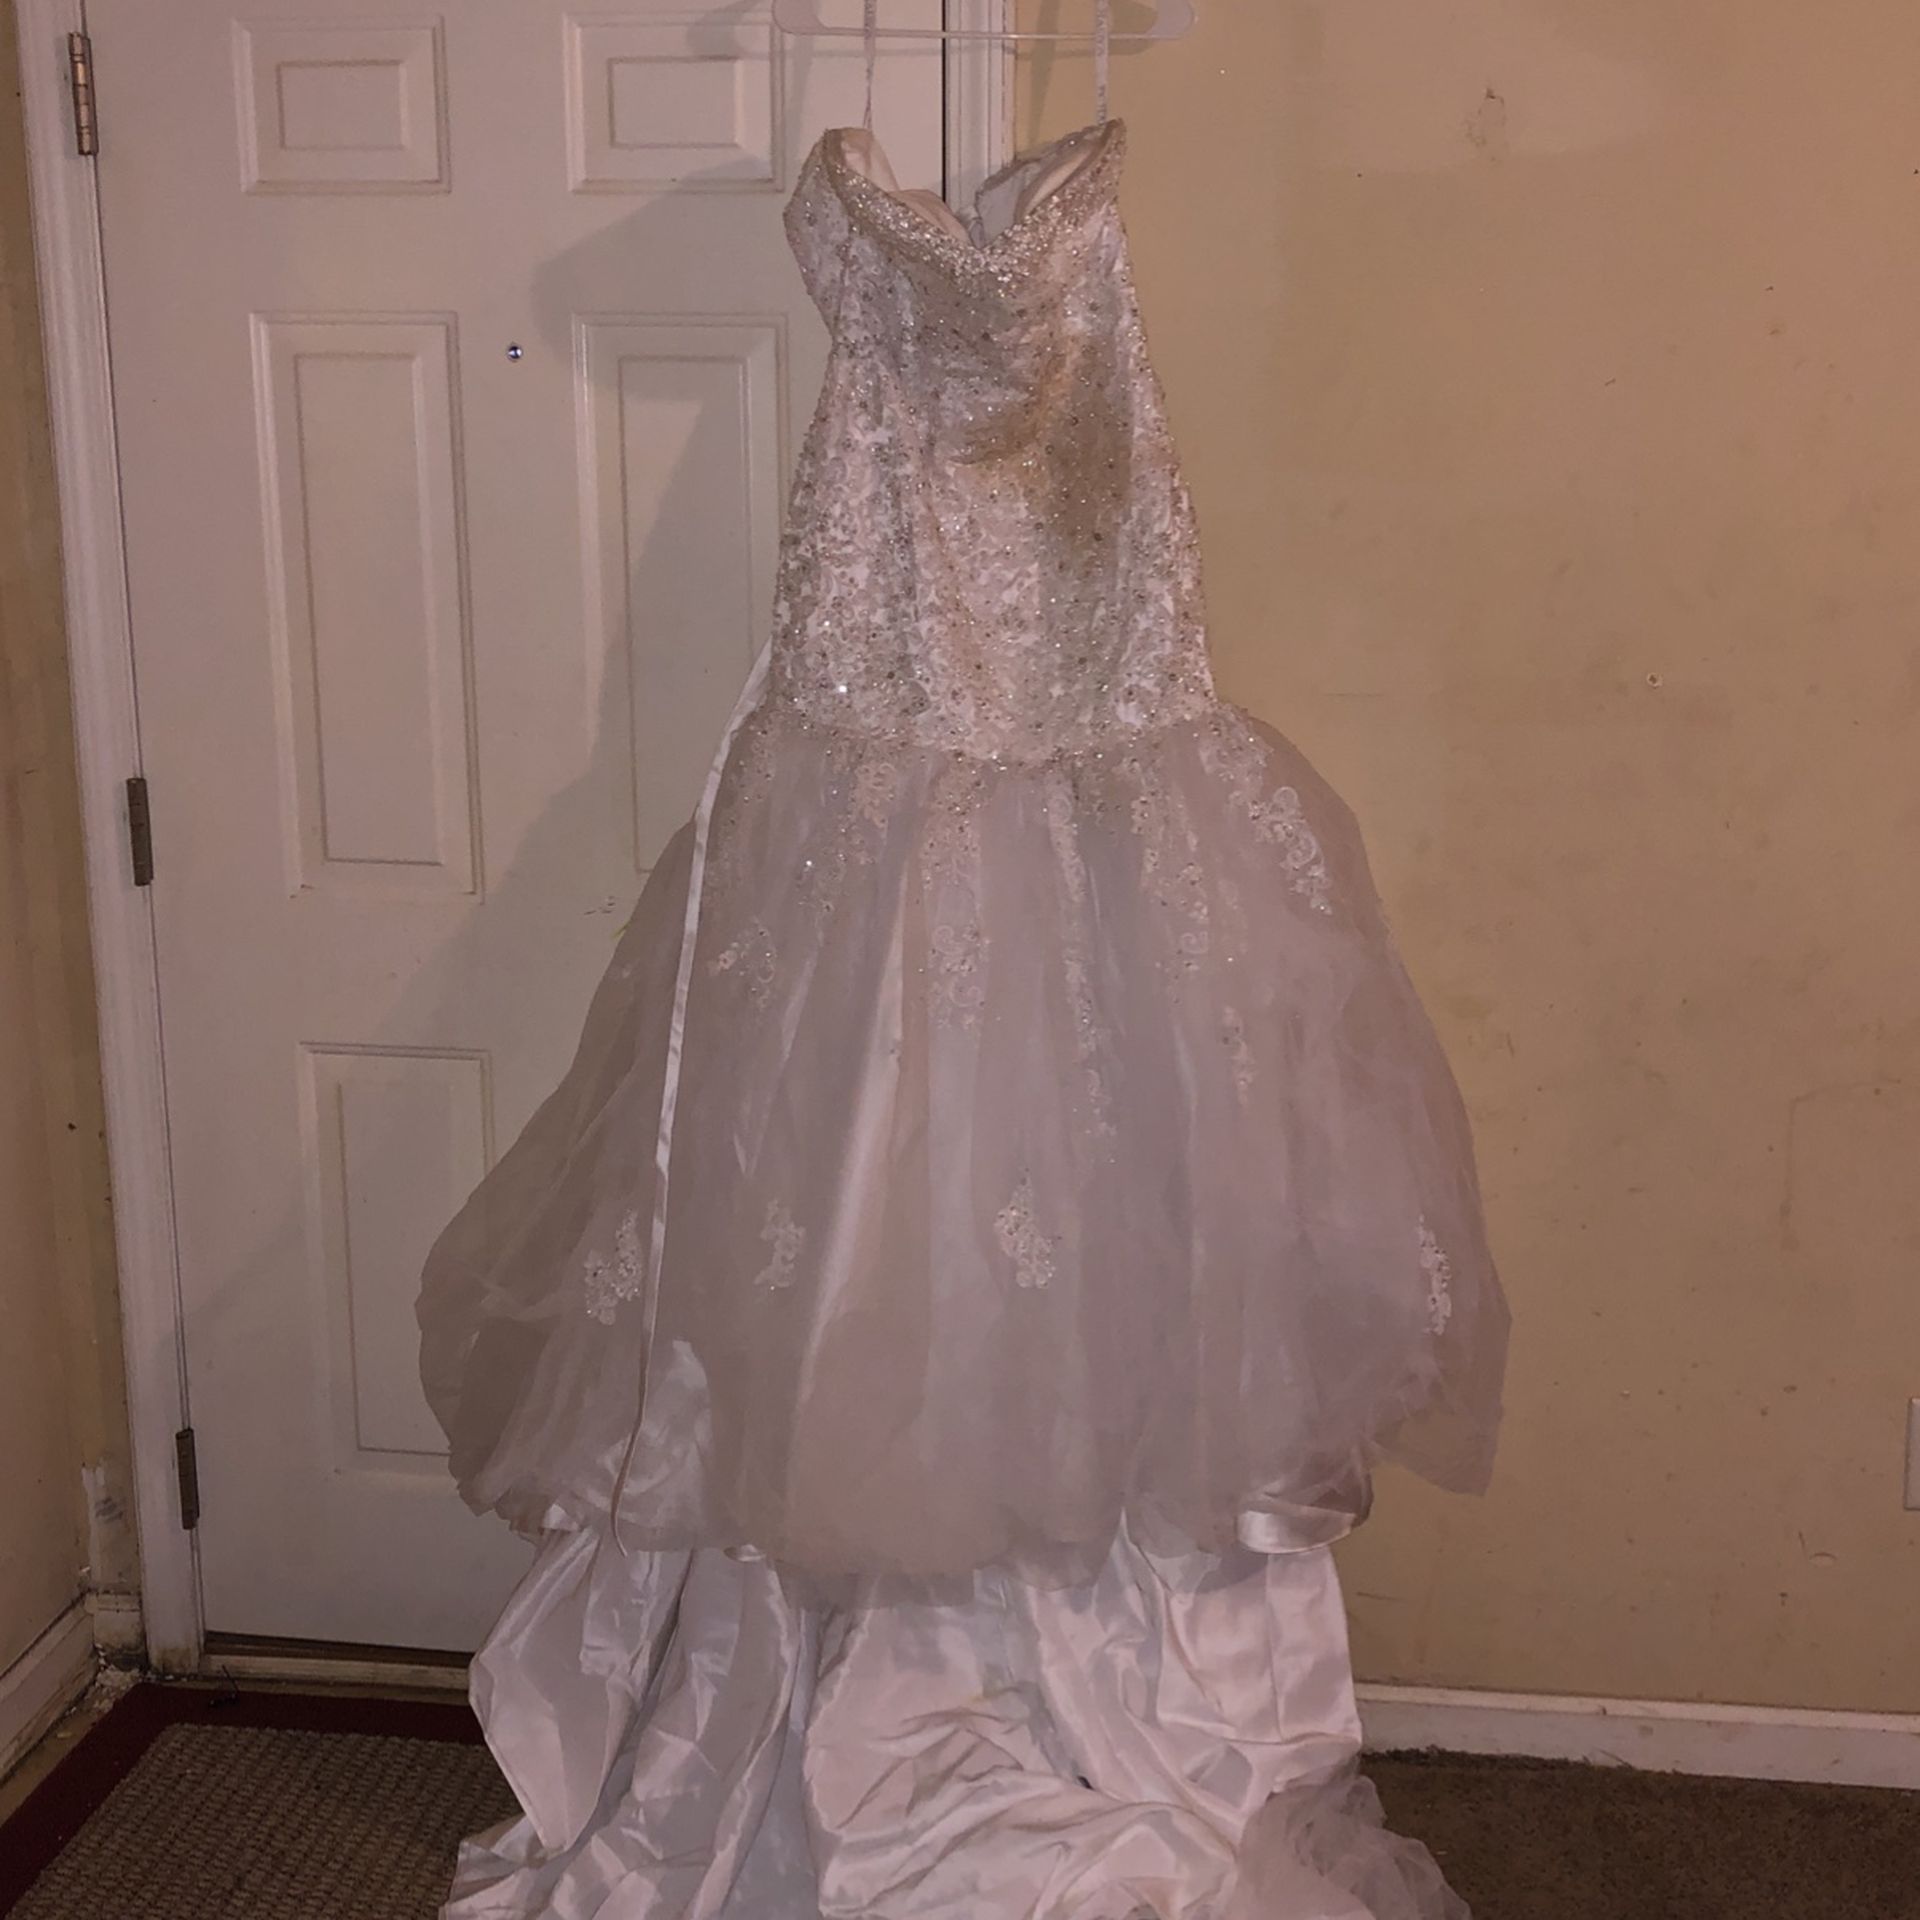 $1200 Wedding Dress With Veil For 800$ OBO